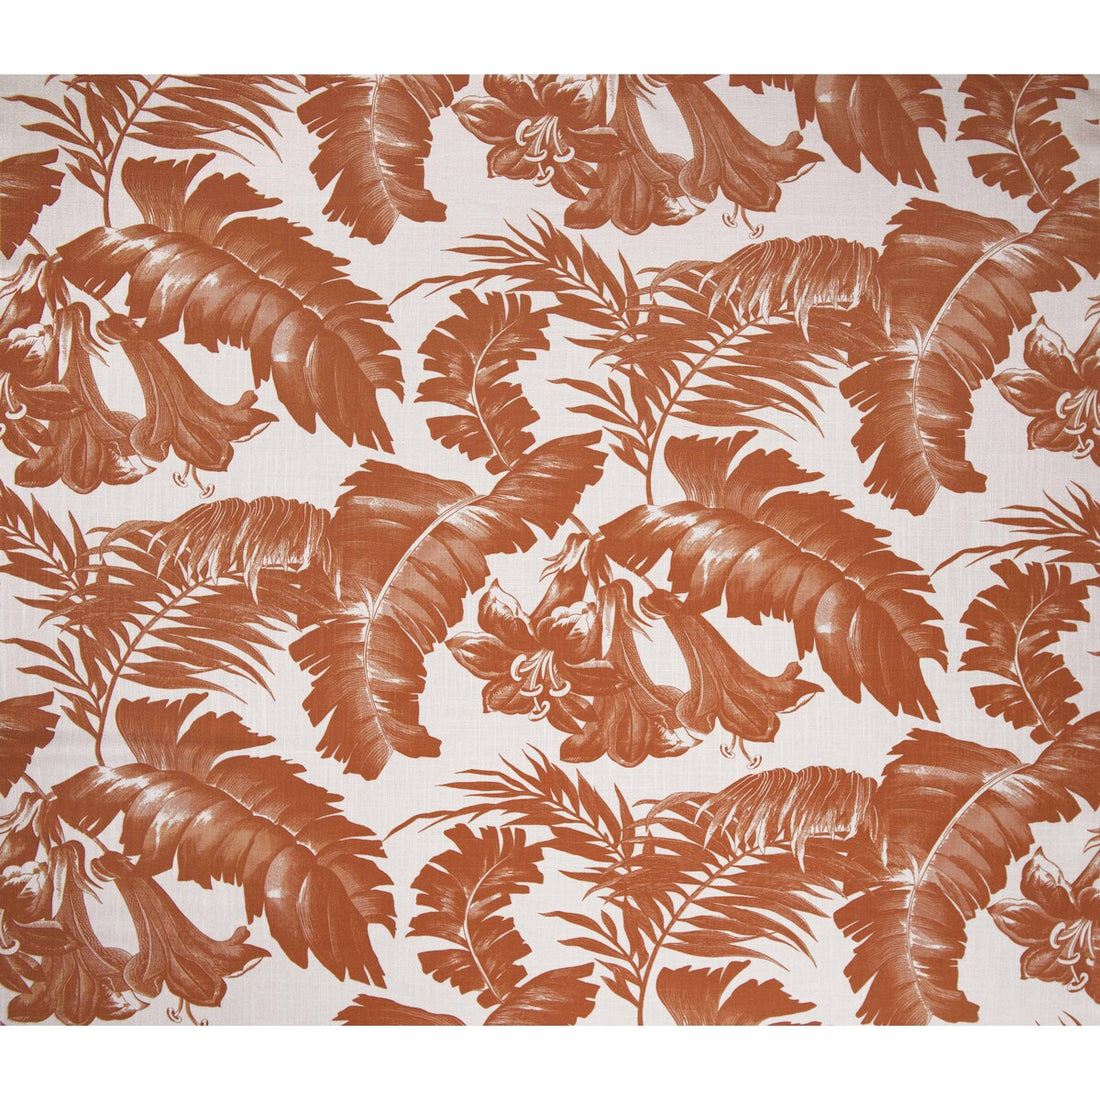 Plantation fabric in naranja color - pattern GDT5401.1.0 - by Gaston y Daniela in the Gaston Africalia collection